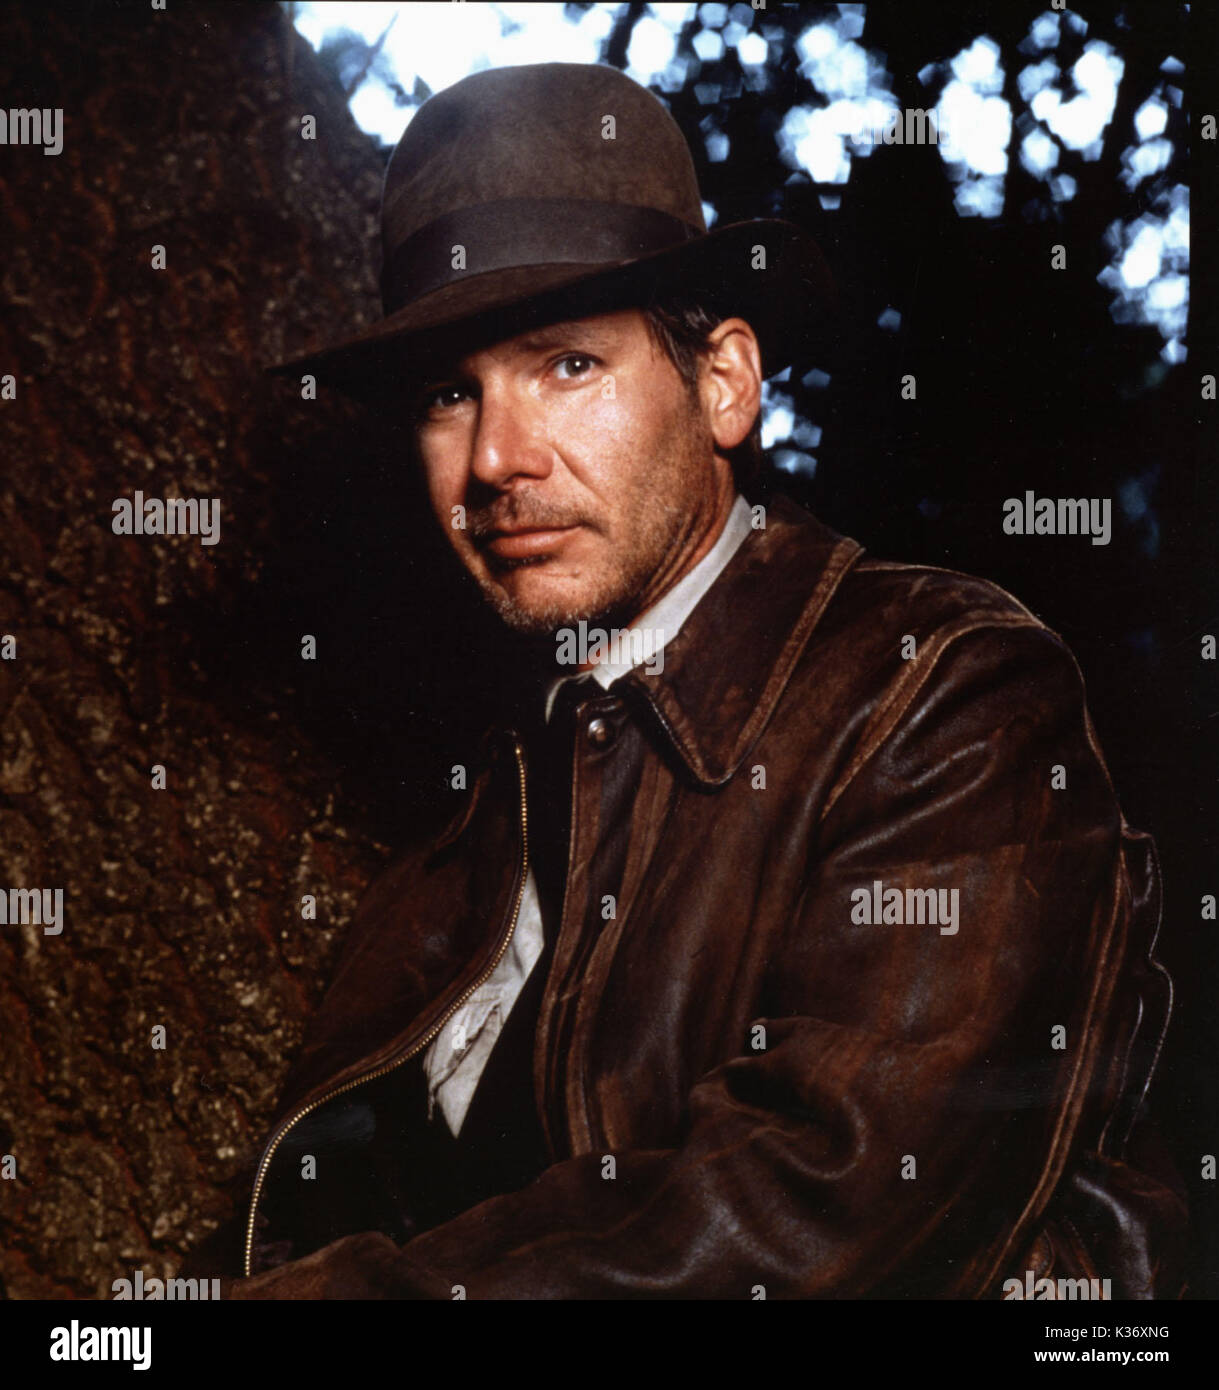 INDIANA JONES AND THE LAST CRUSADE HARRISON FORD PLEASE CREDIT: LUCASFILM     Date: 1989 Stock Photo